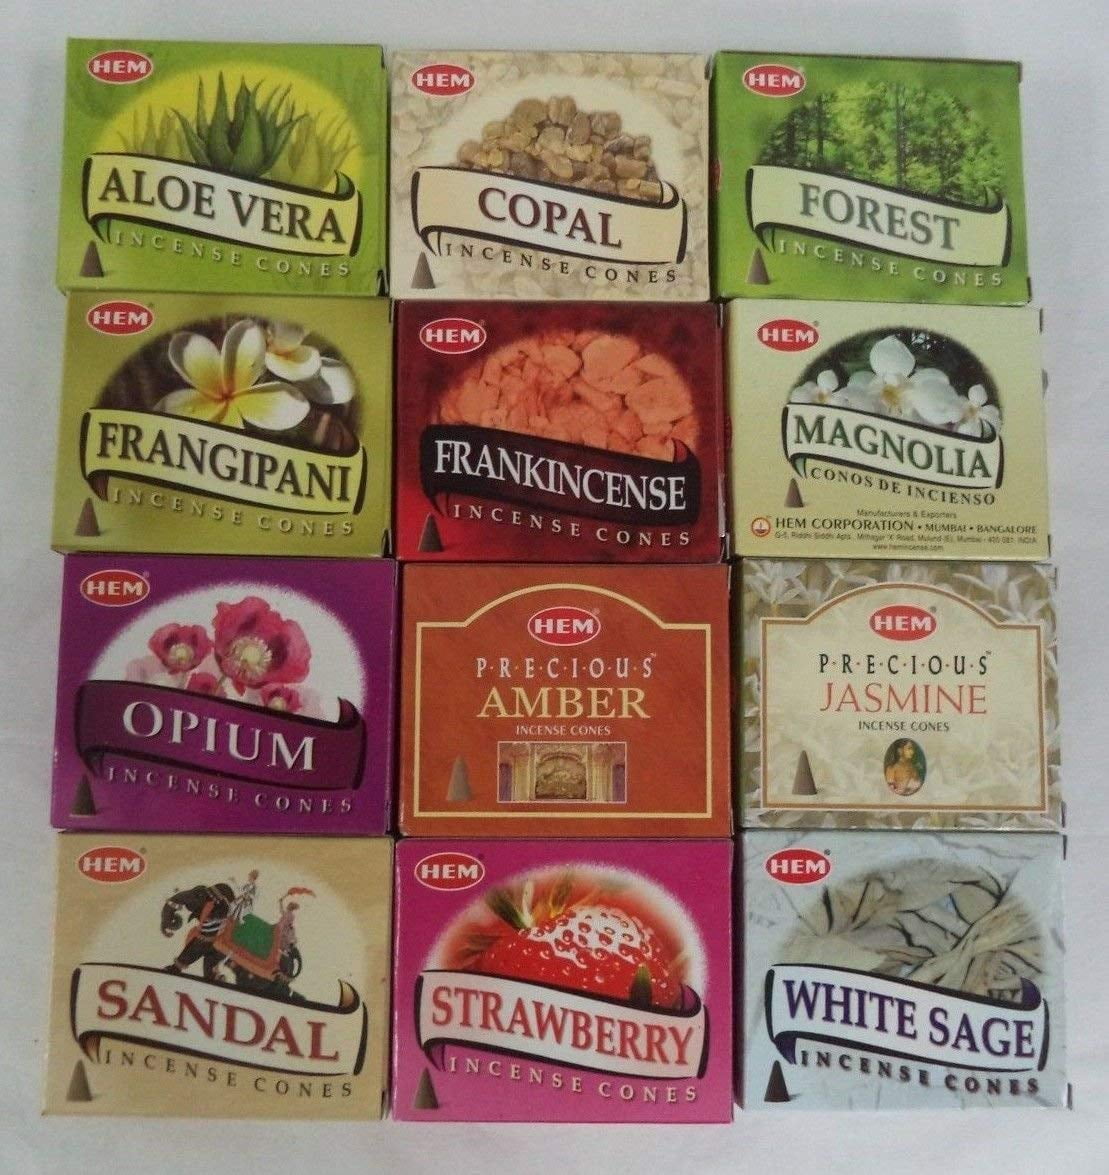 12 Assorted Boxes of Hem Incense Cones Best Sellers Set #2 12 X 10 120 Tota... for sale online 